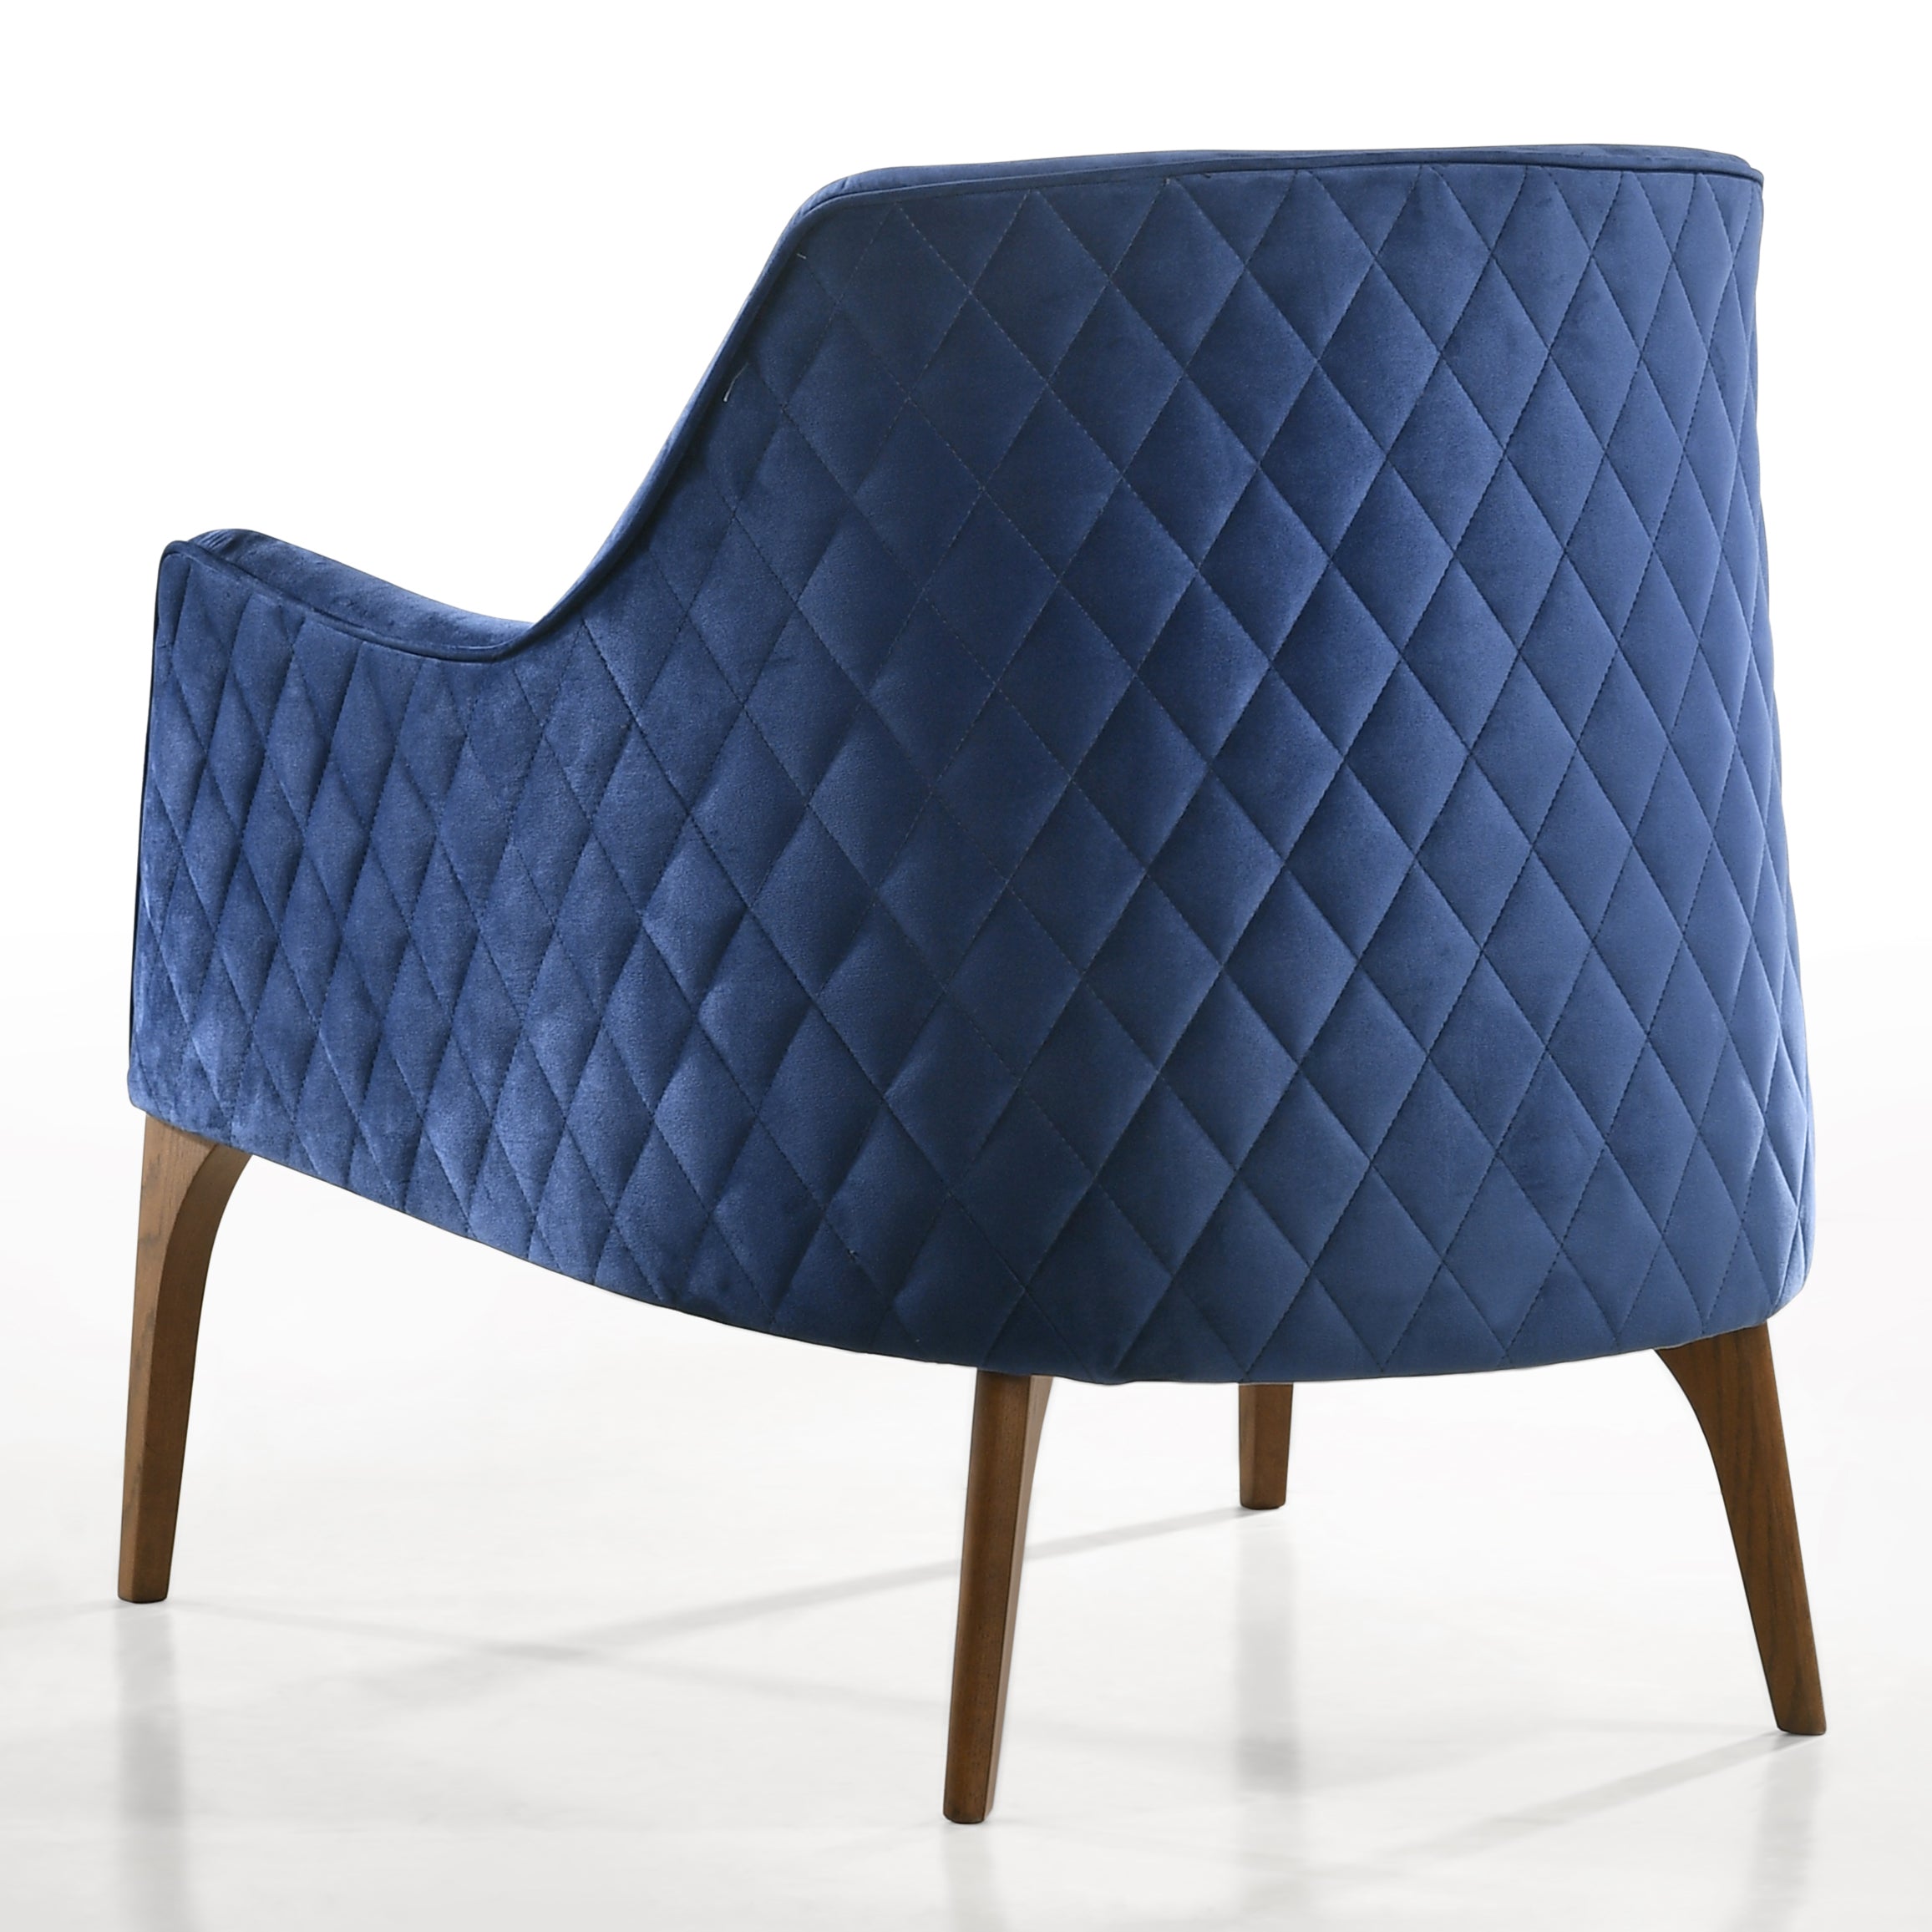 Jane Upholstered Lounge Accent Chair, Blue